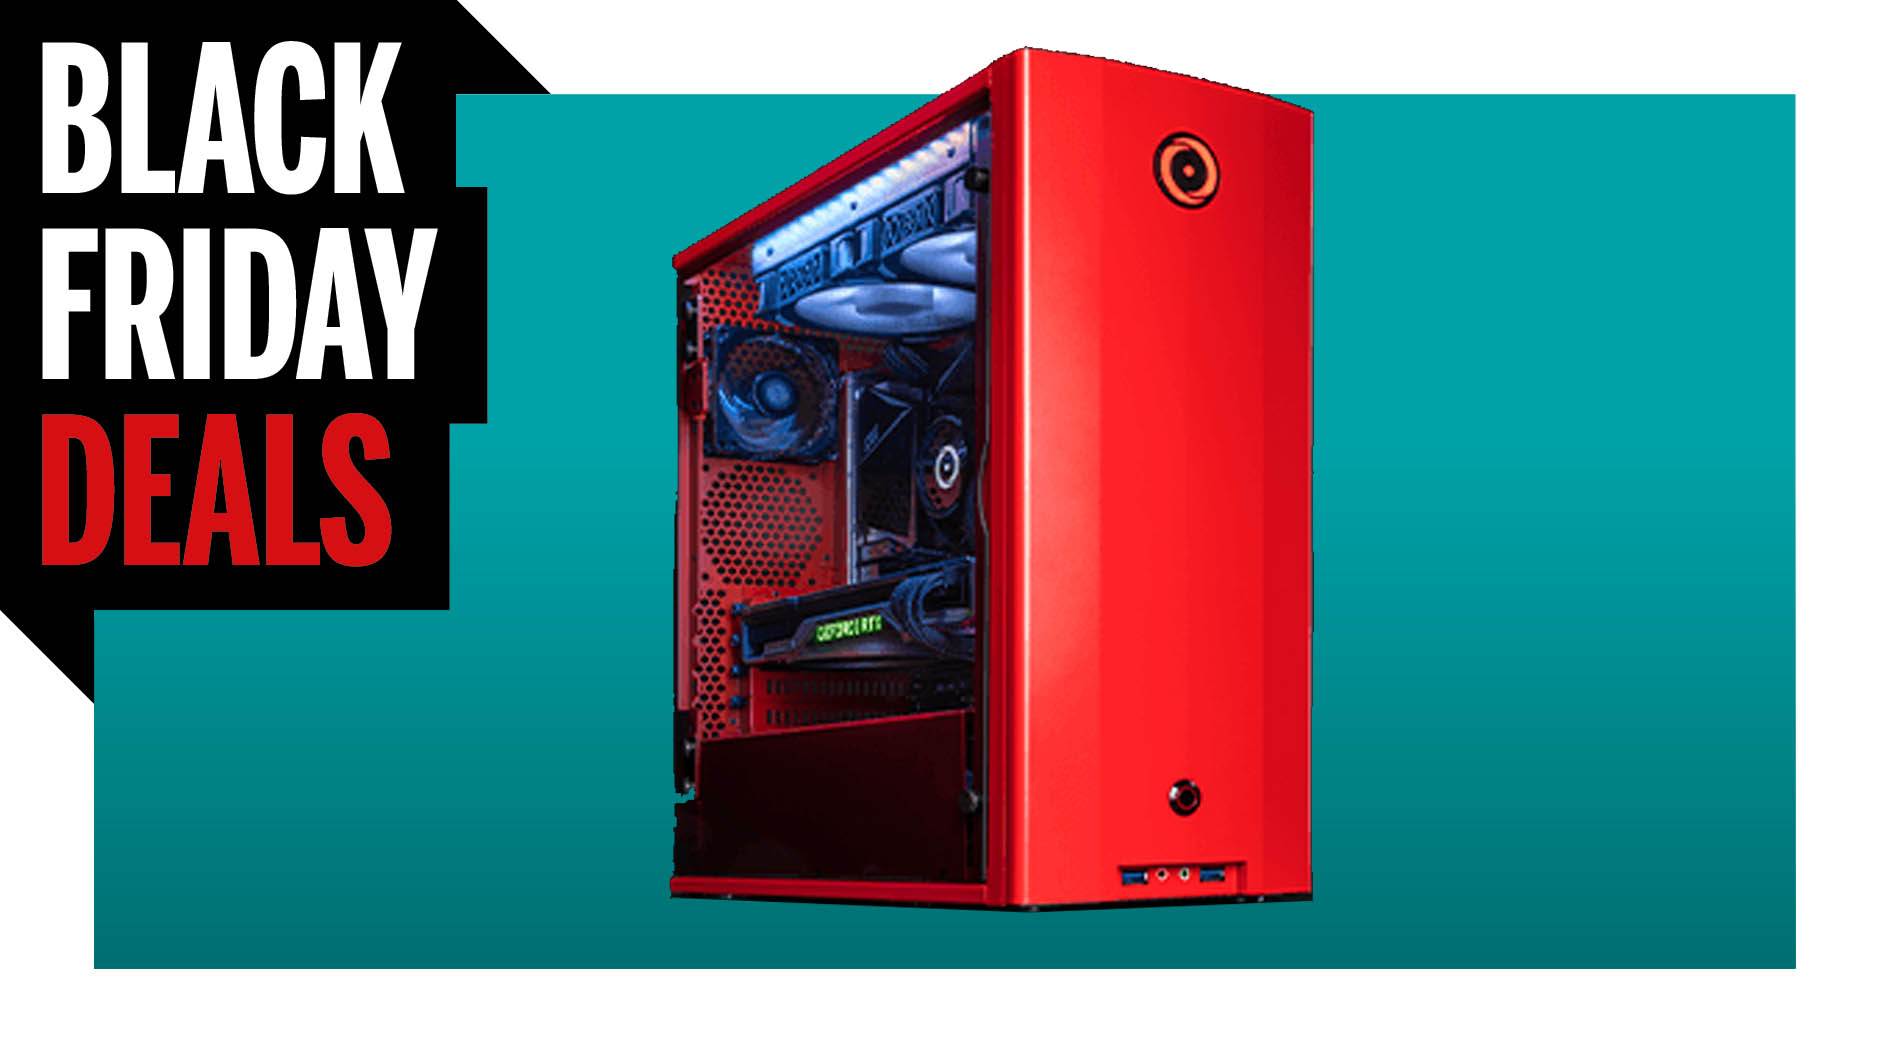  Buy an RTX 3070 gaming PC and get your peripherals for free with this Origin deal 